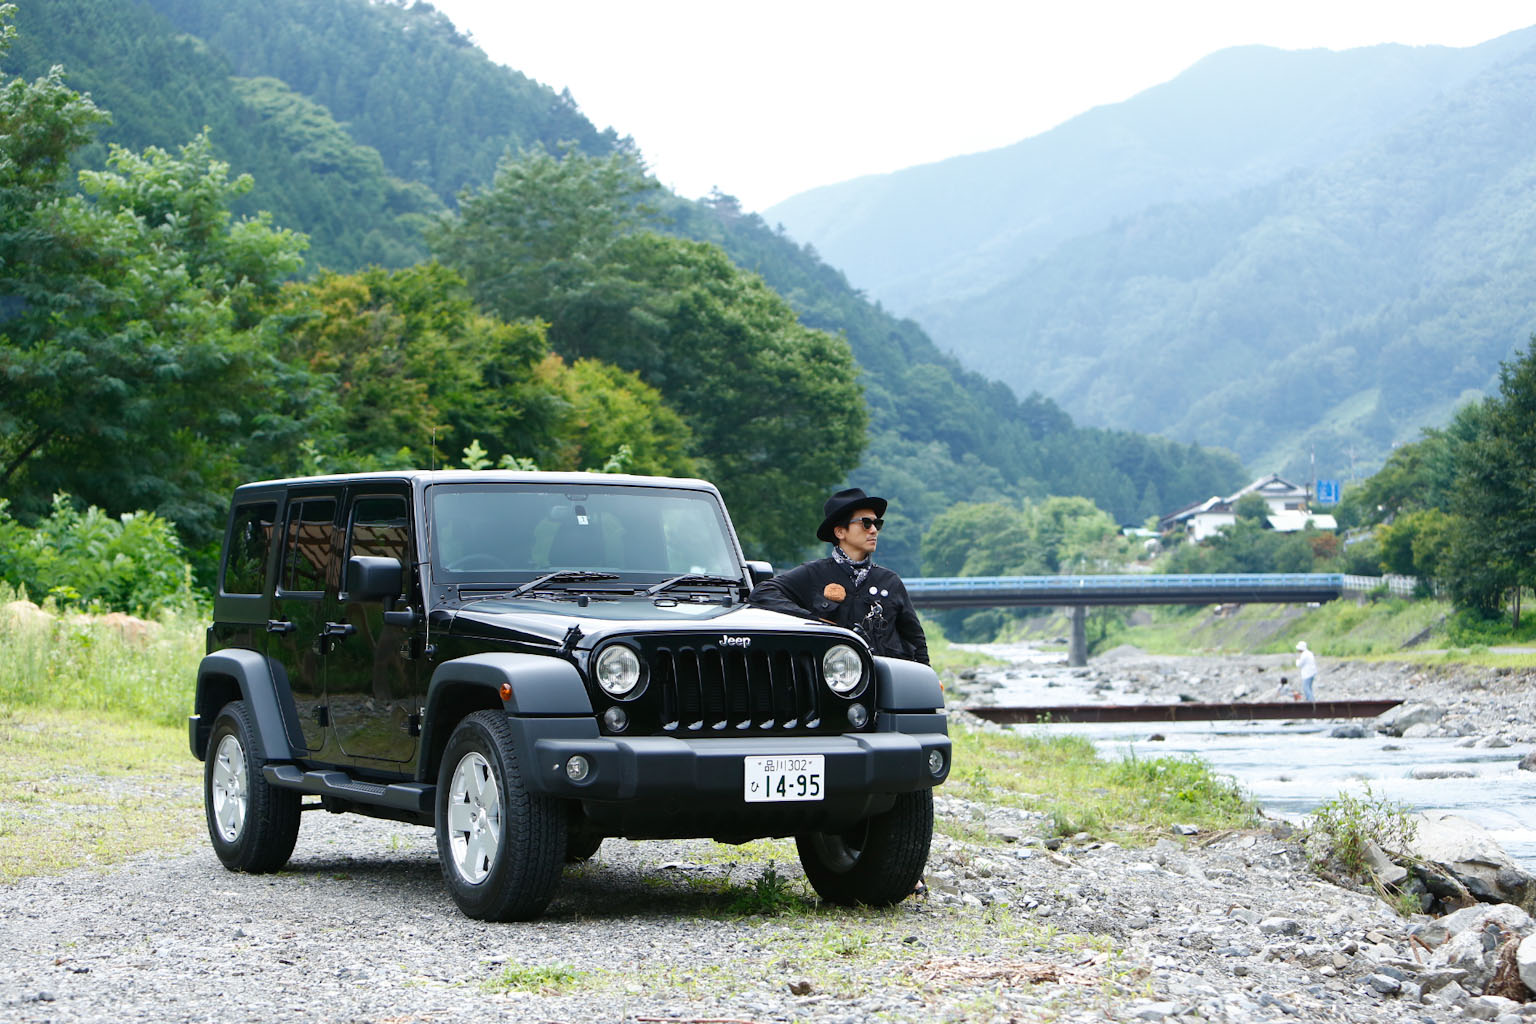 Y6A2721-1 My Jeep®,My Life. ボクとJeep®の暮らしかた。スタイリスト・望月 唯